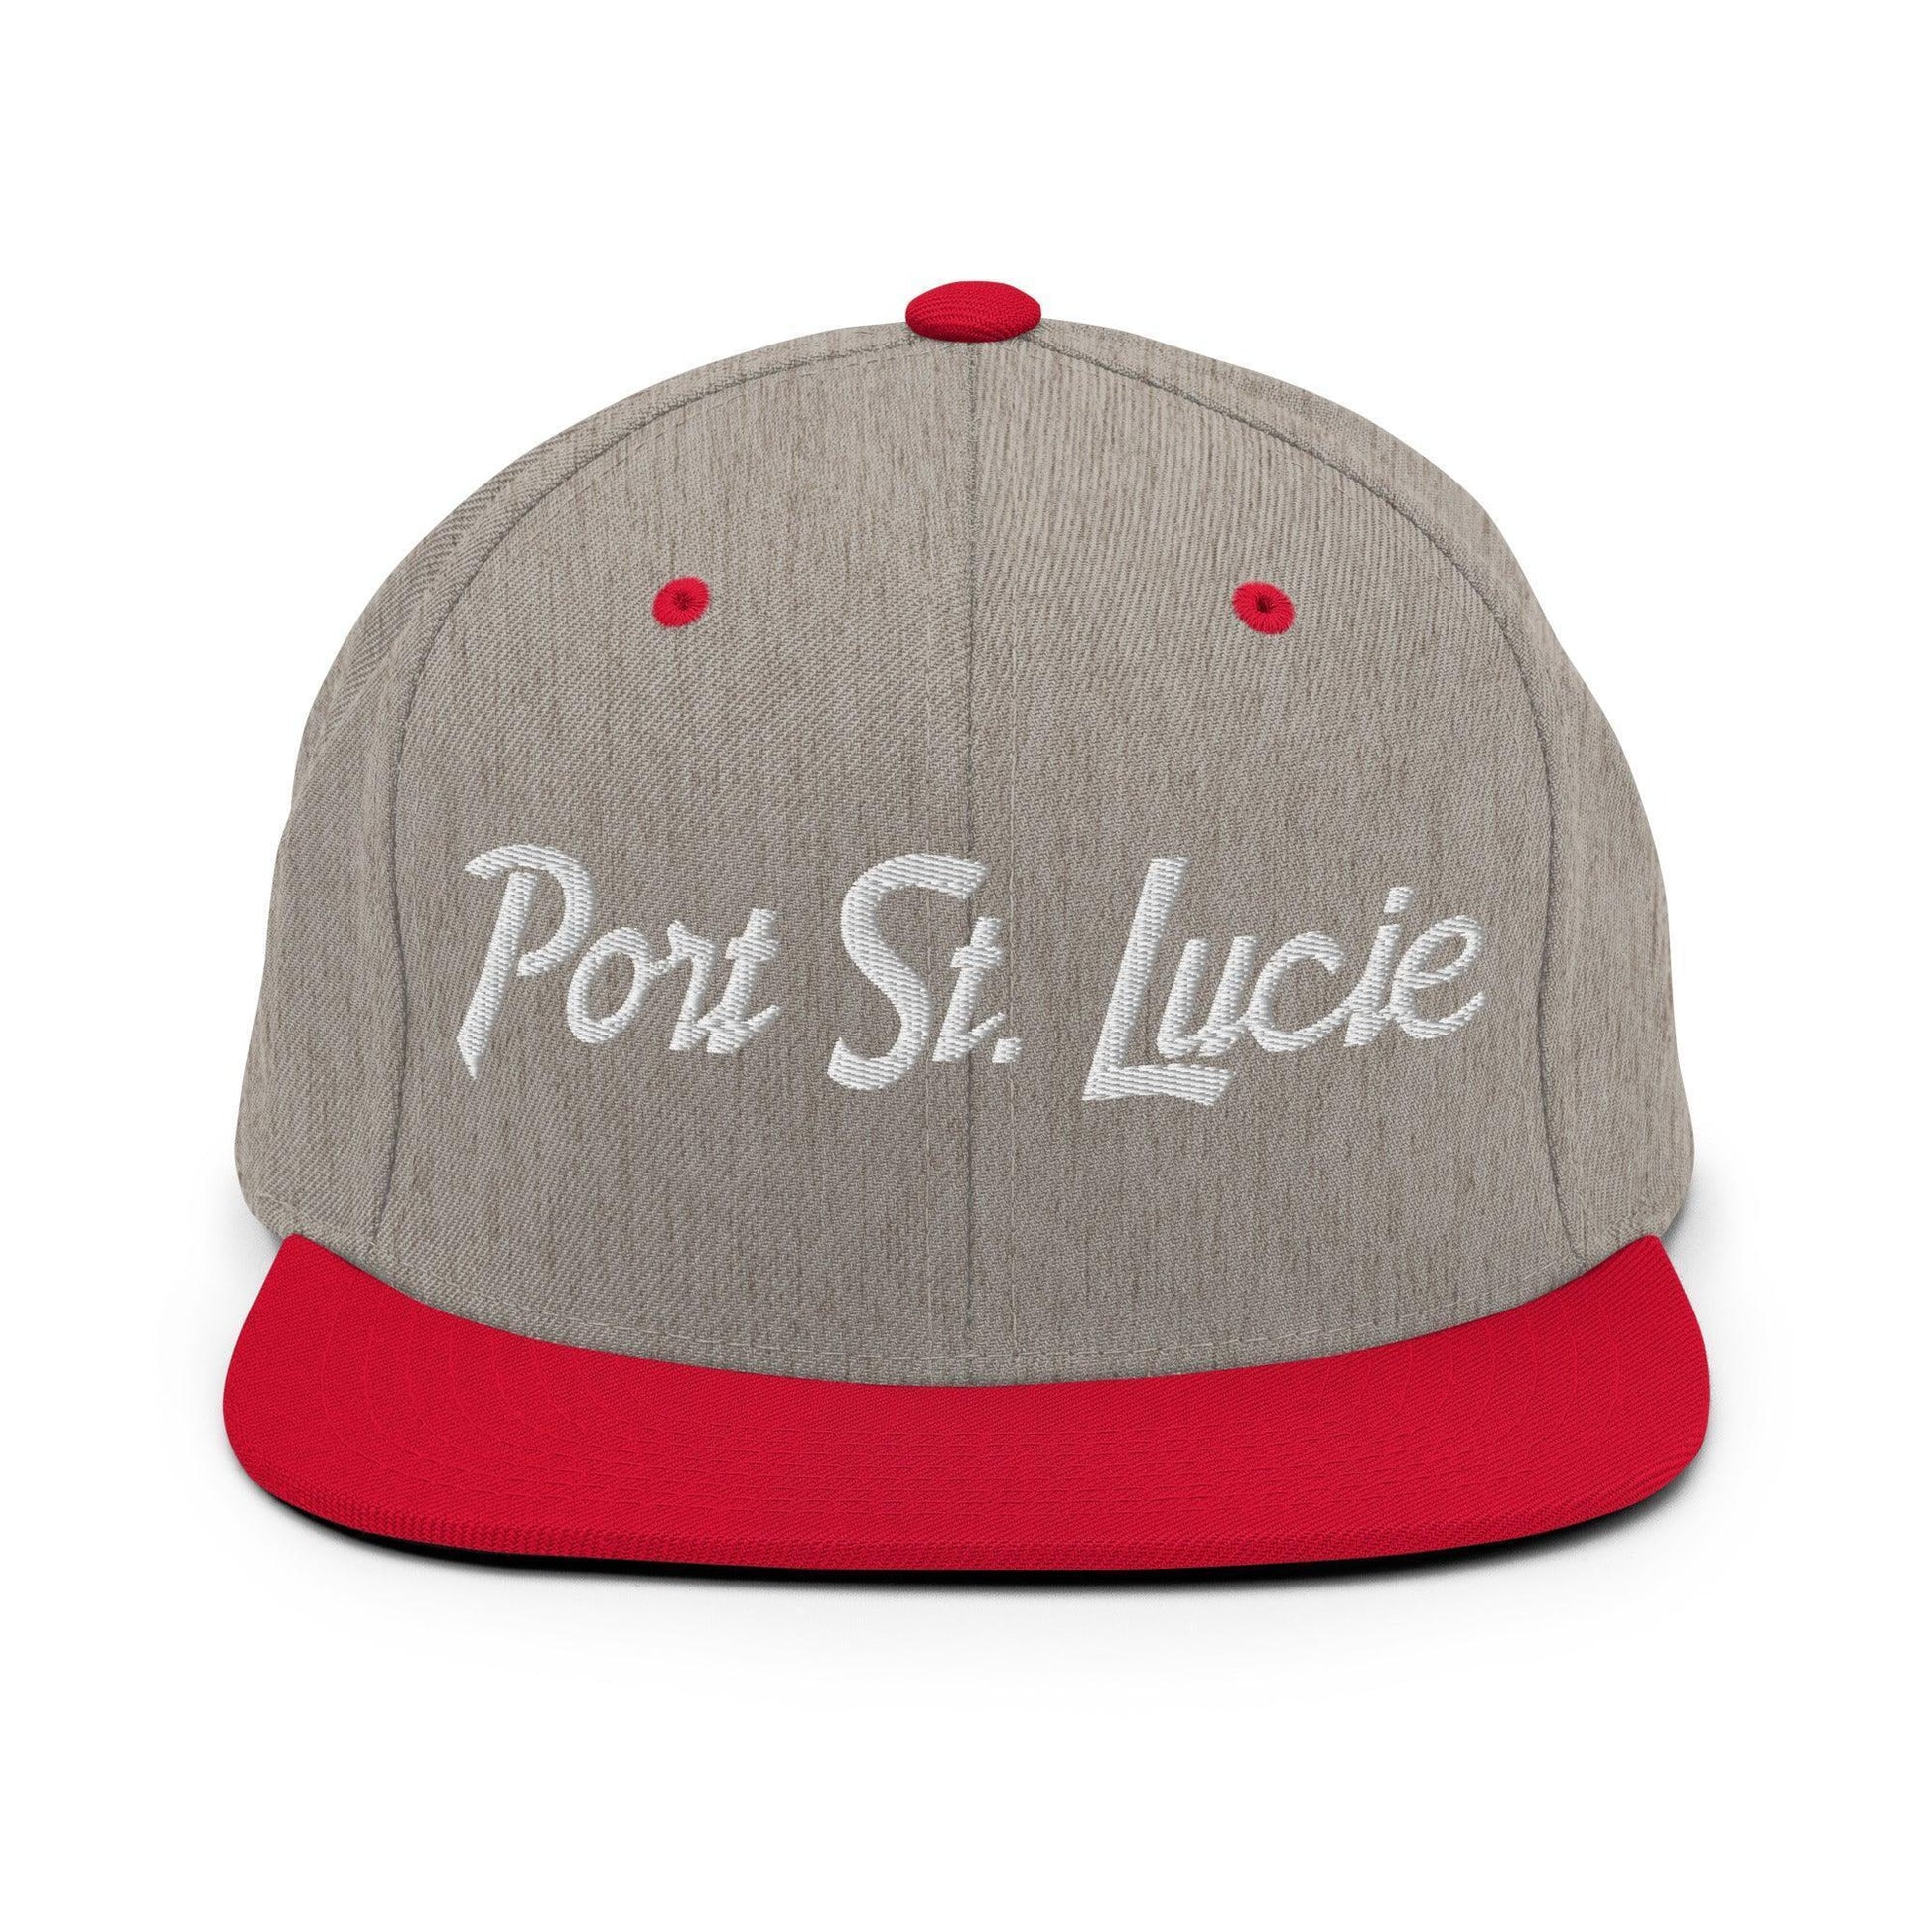 Port St. Lucie Script Snapback Hat Heather Grey/ Red